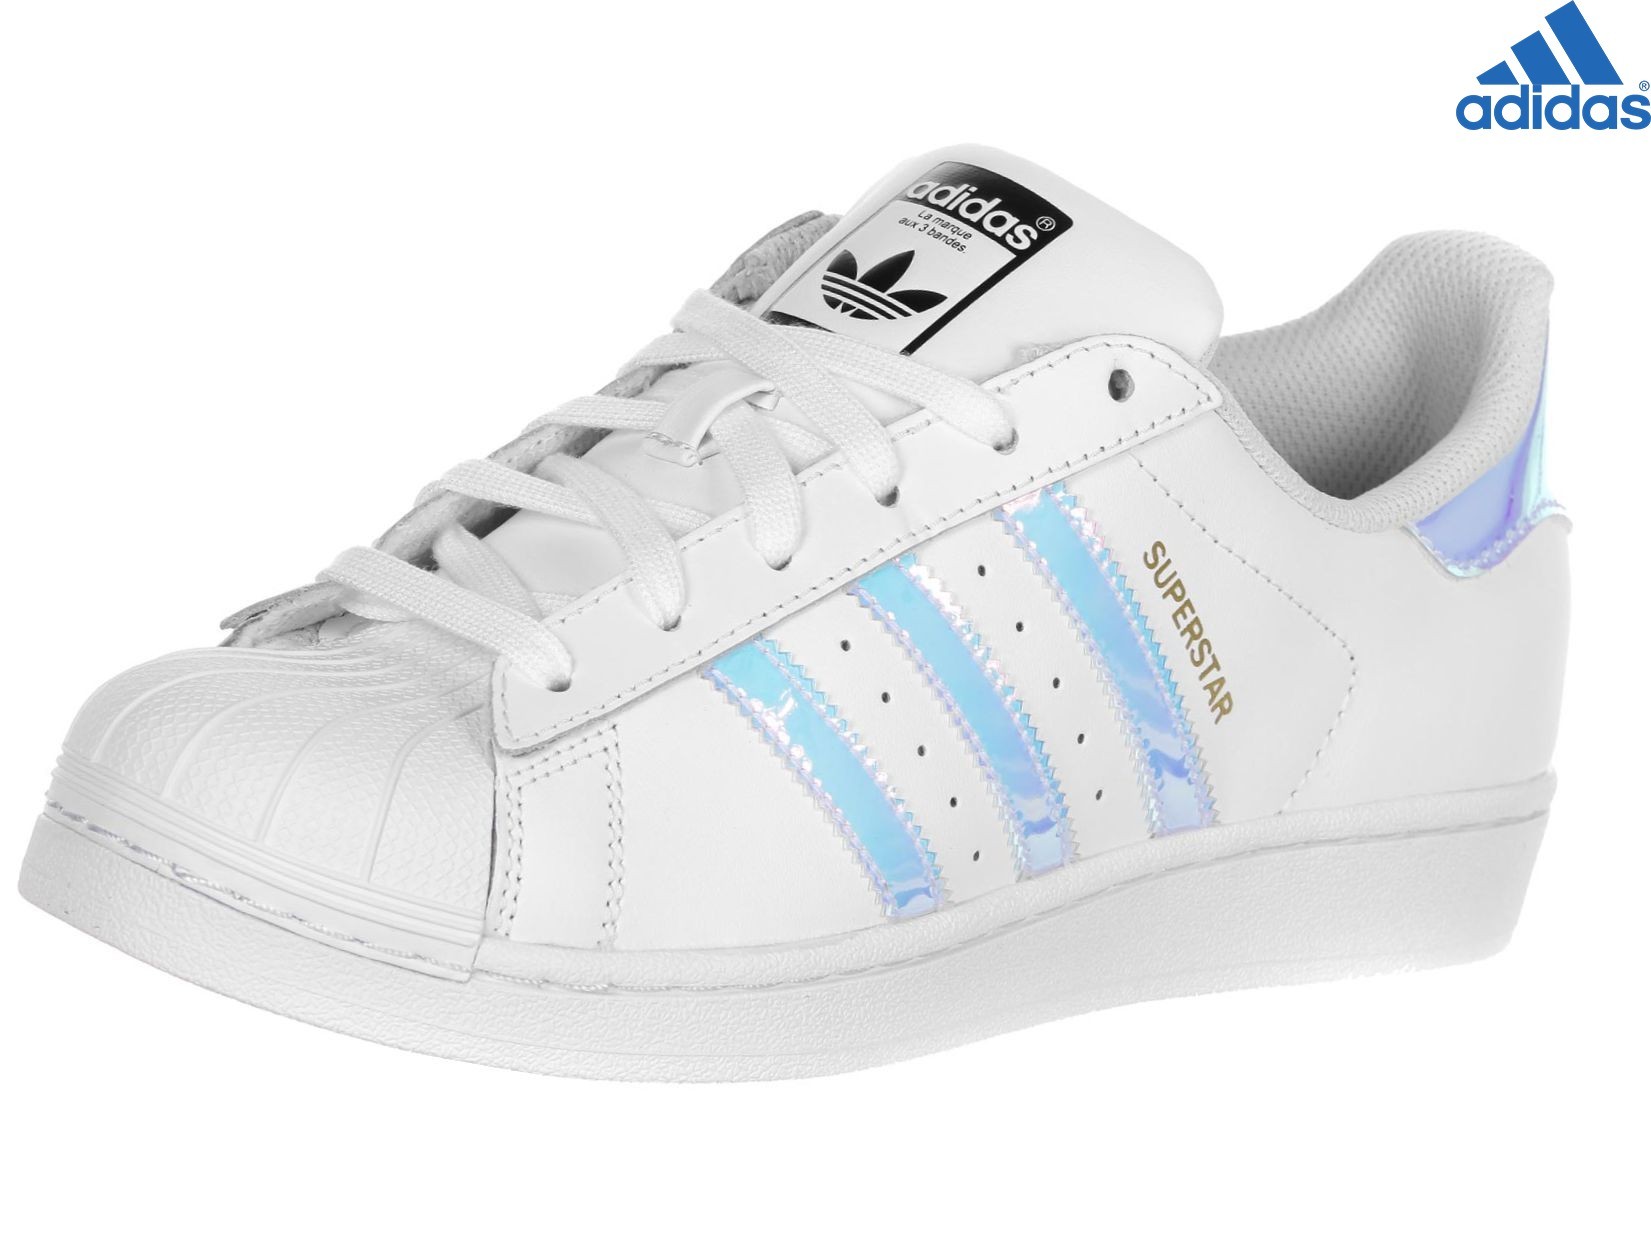 adidas femme courir - 51% OFF - Free delivery - studentet ...